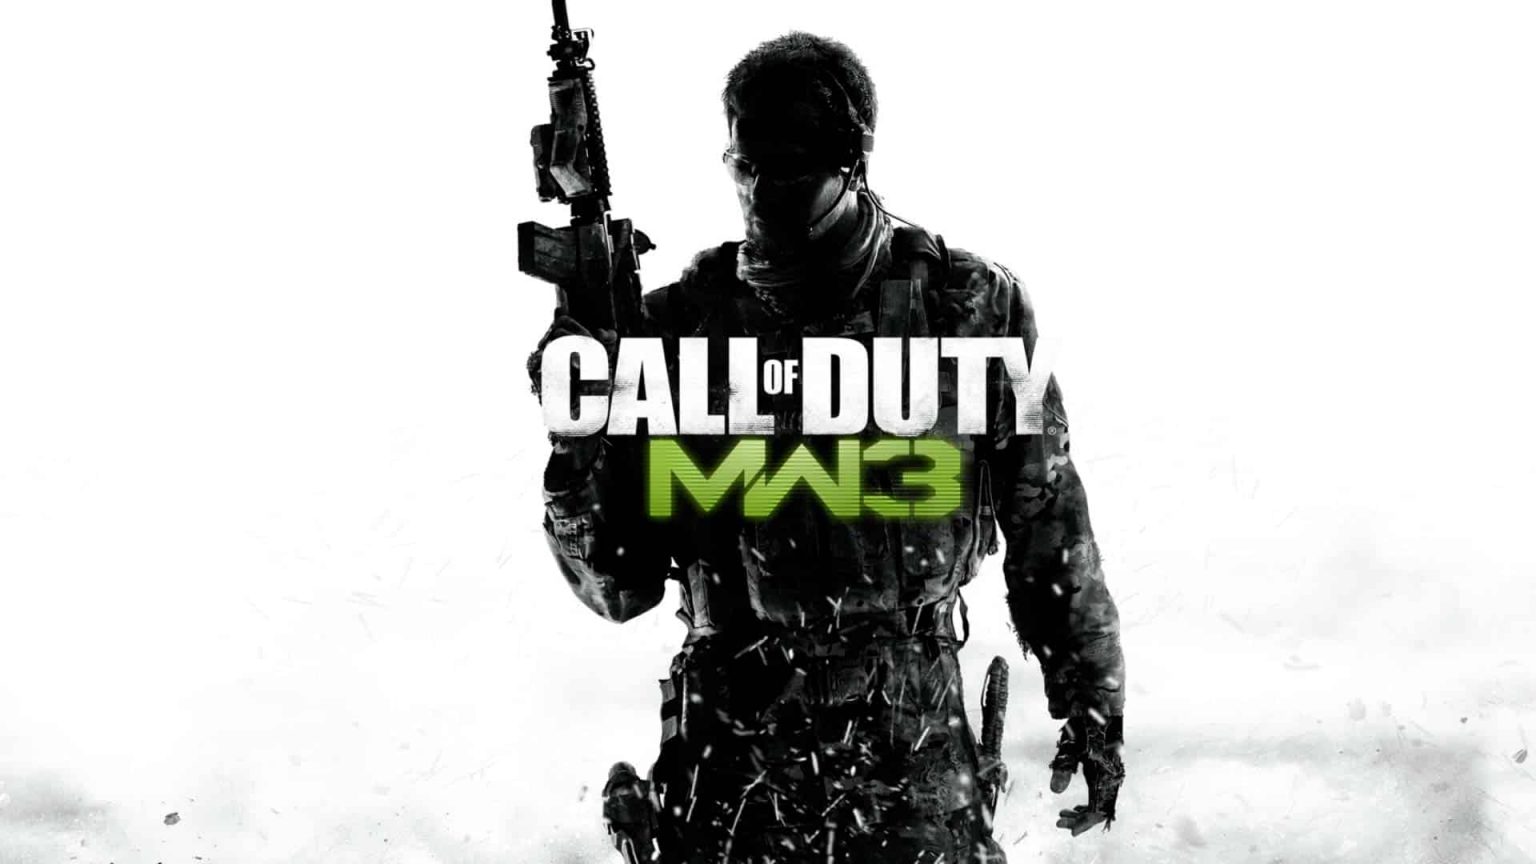 Call of Duty Modern Warfare 3 Xbox Version Full Game Free Download